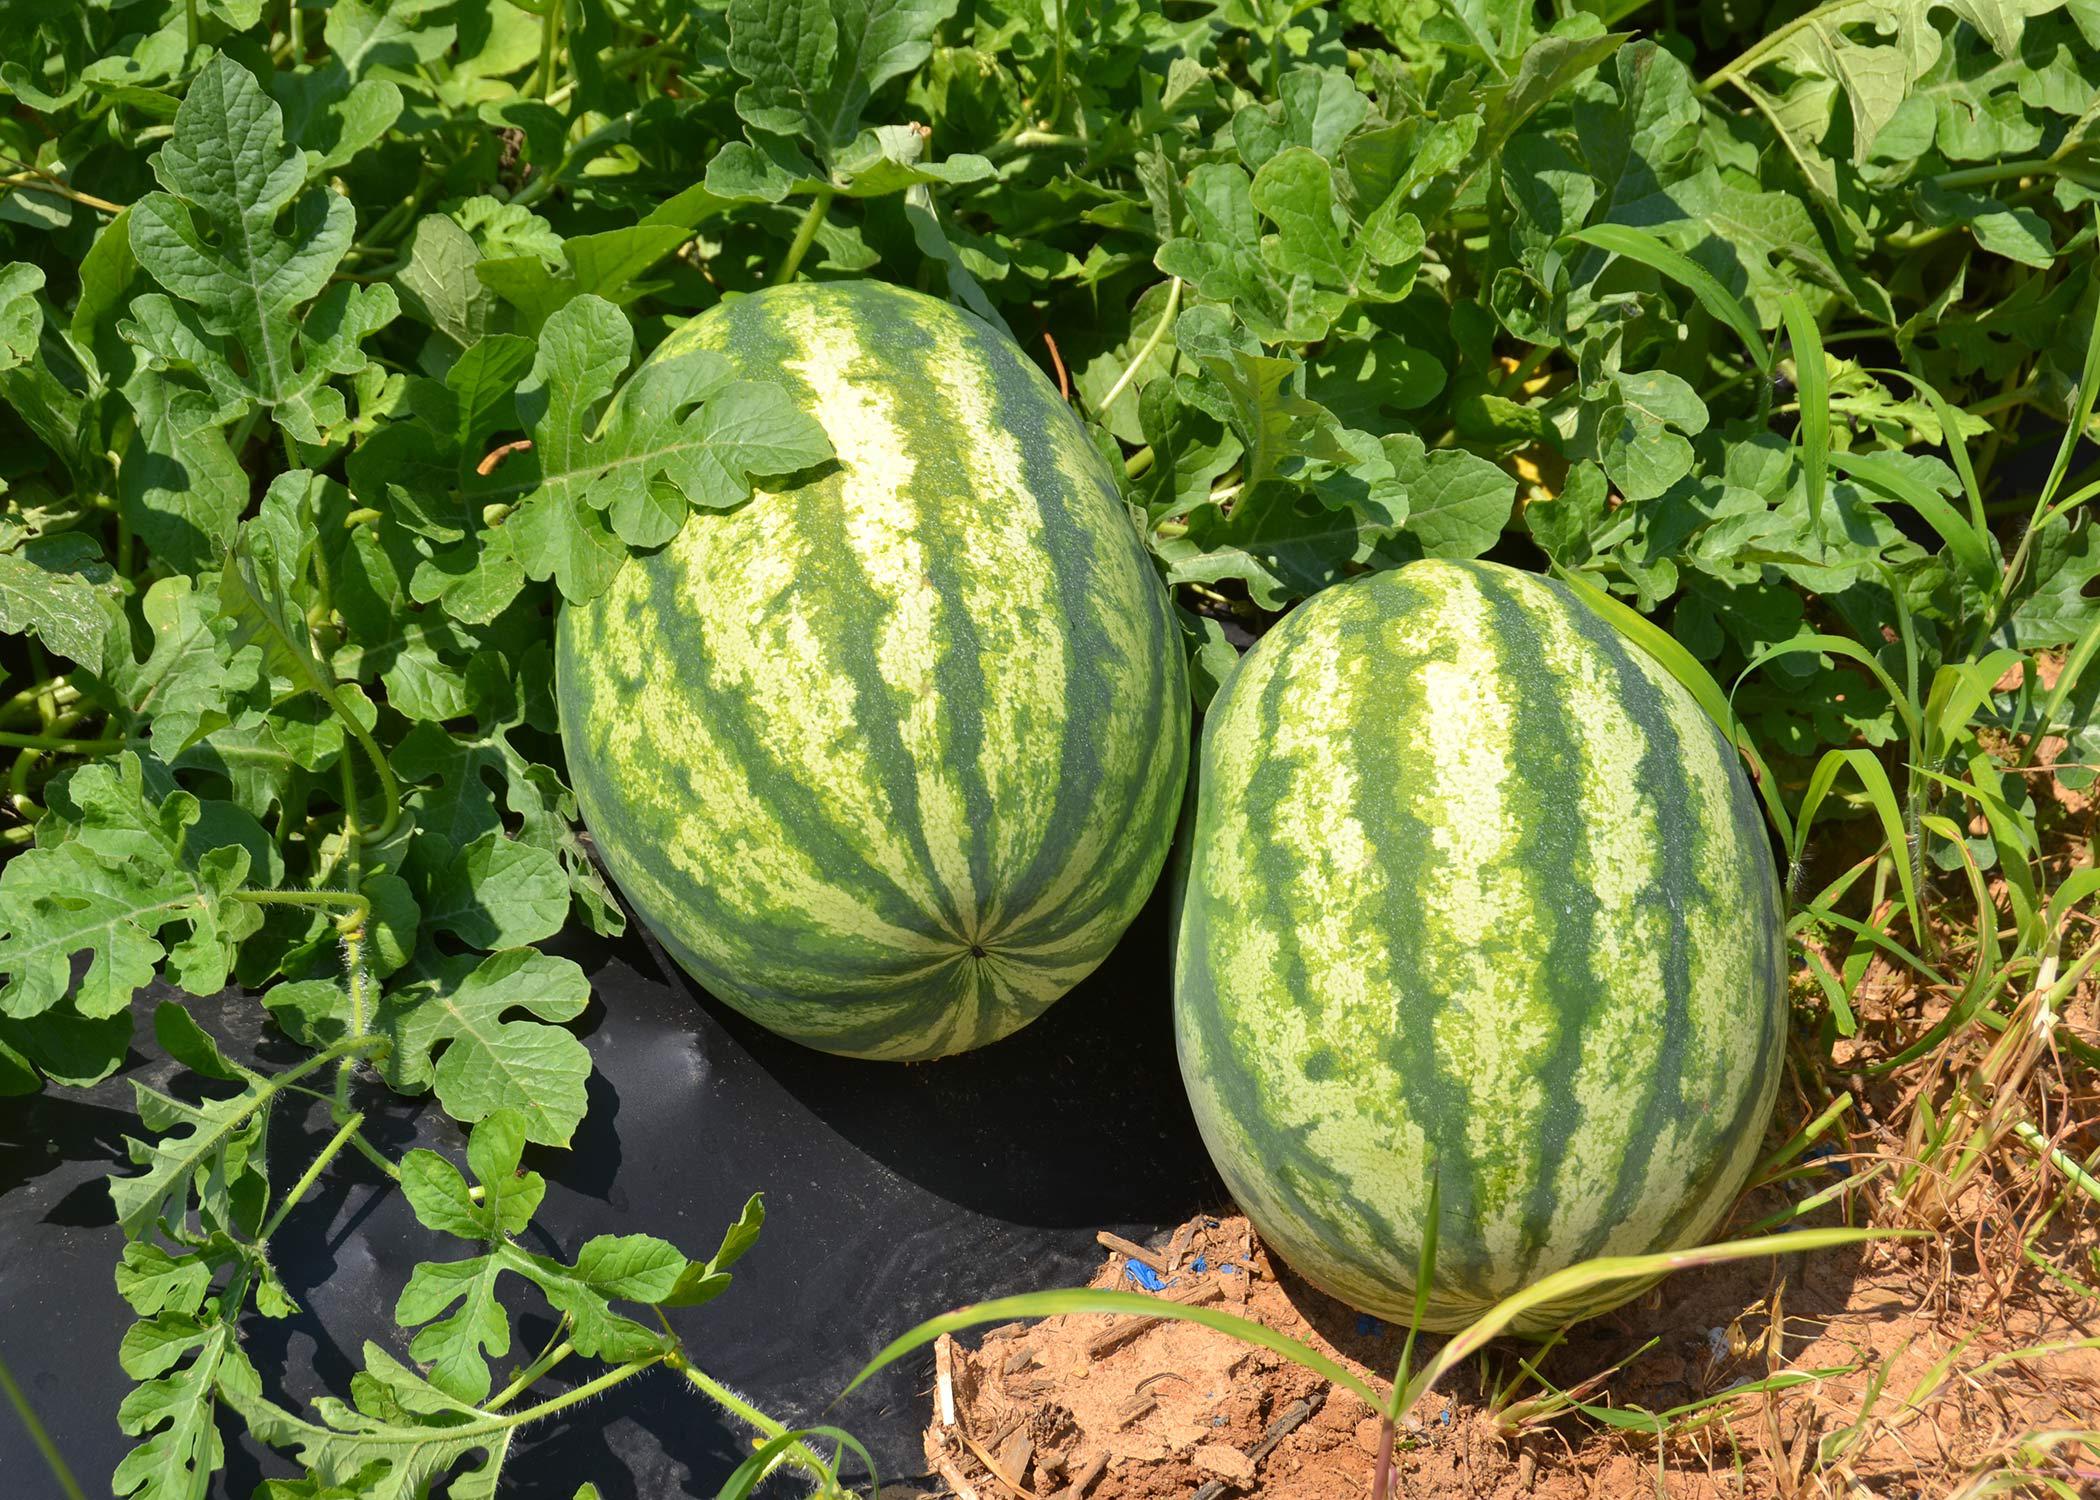 Two watermelons on the vine.